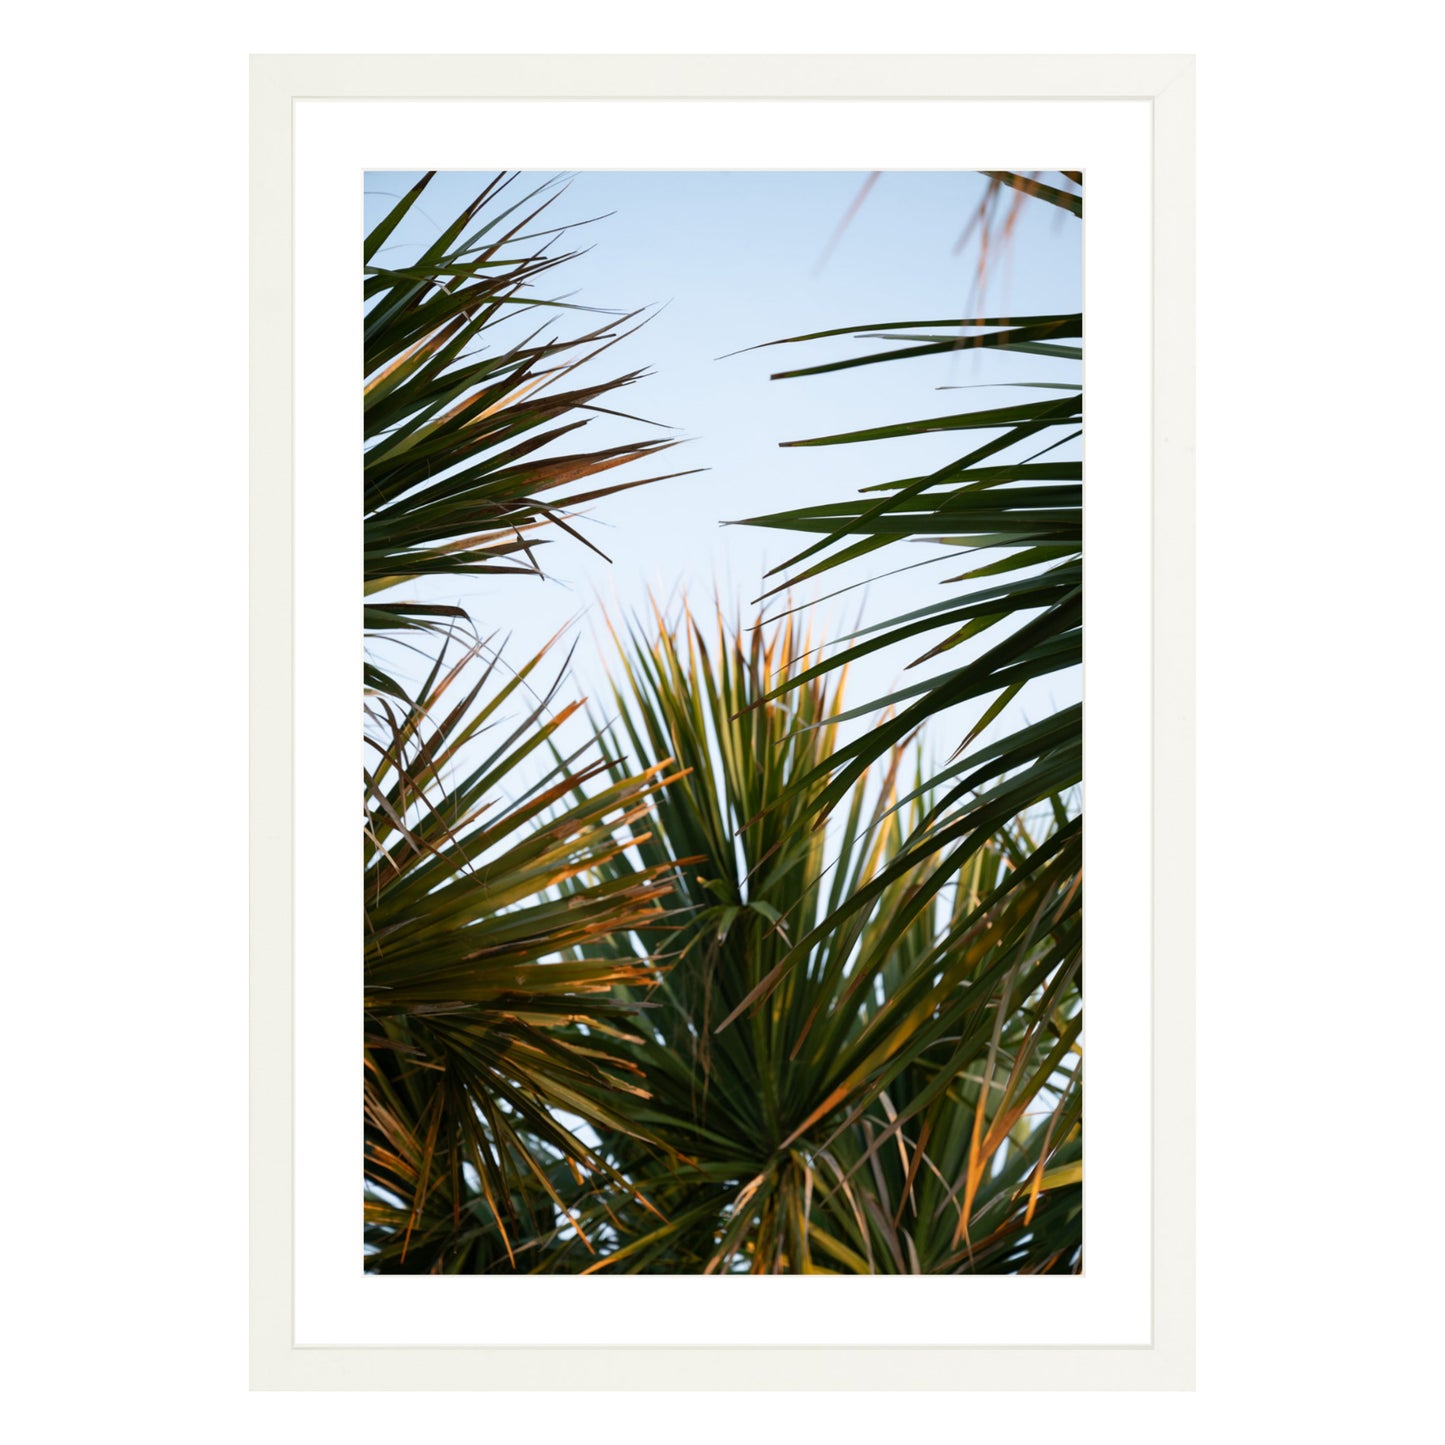 Photograph of beach palms in front of blue sky framed in white with white mat